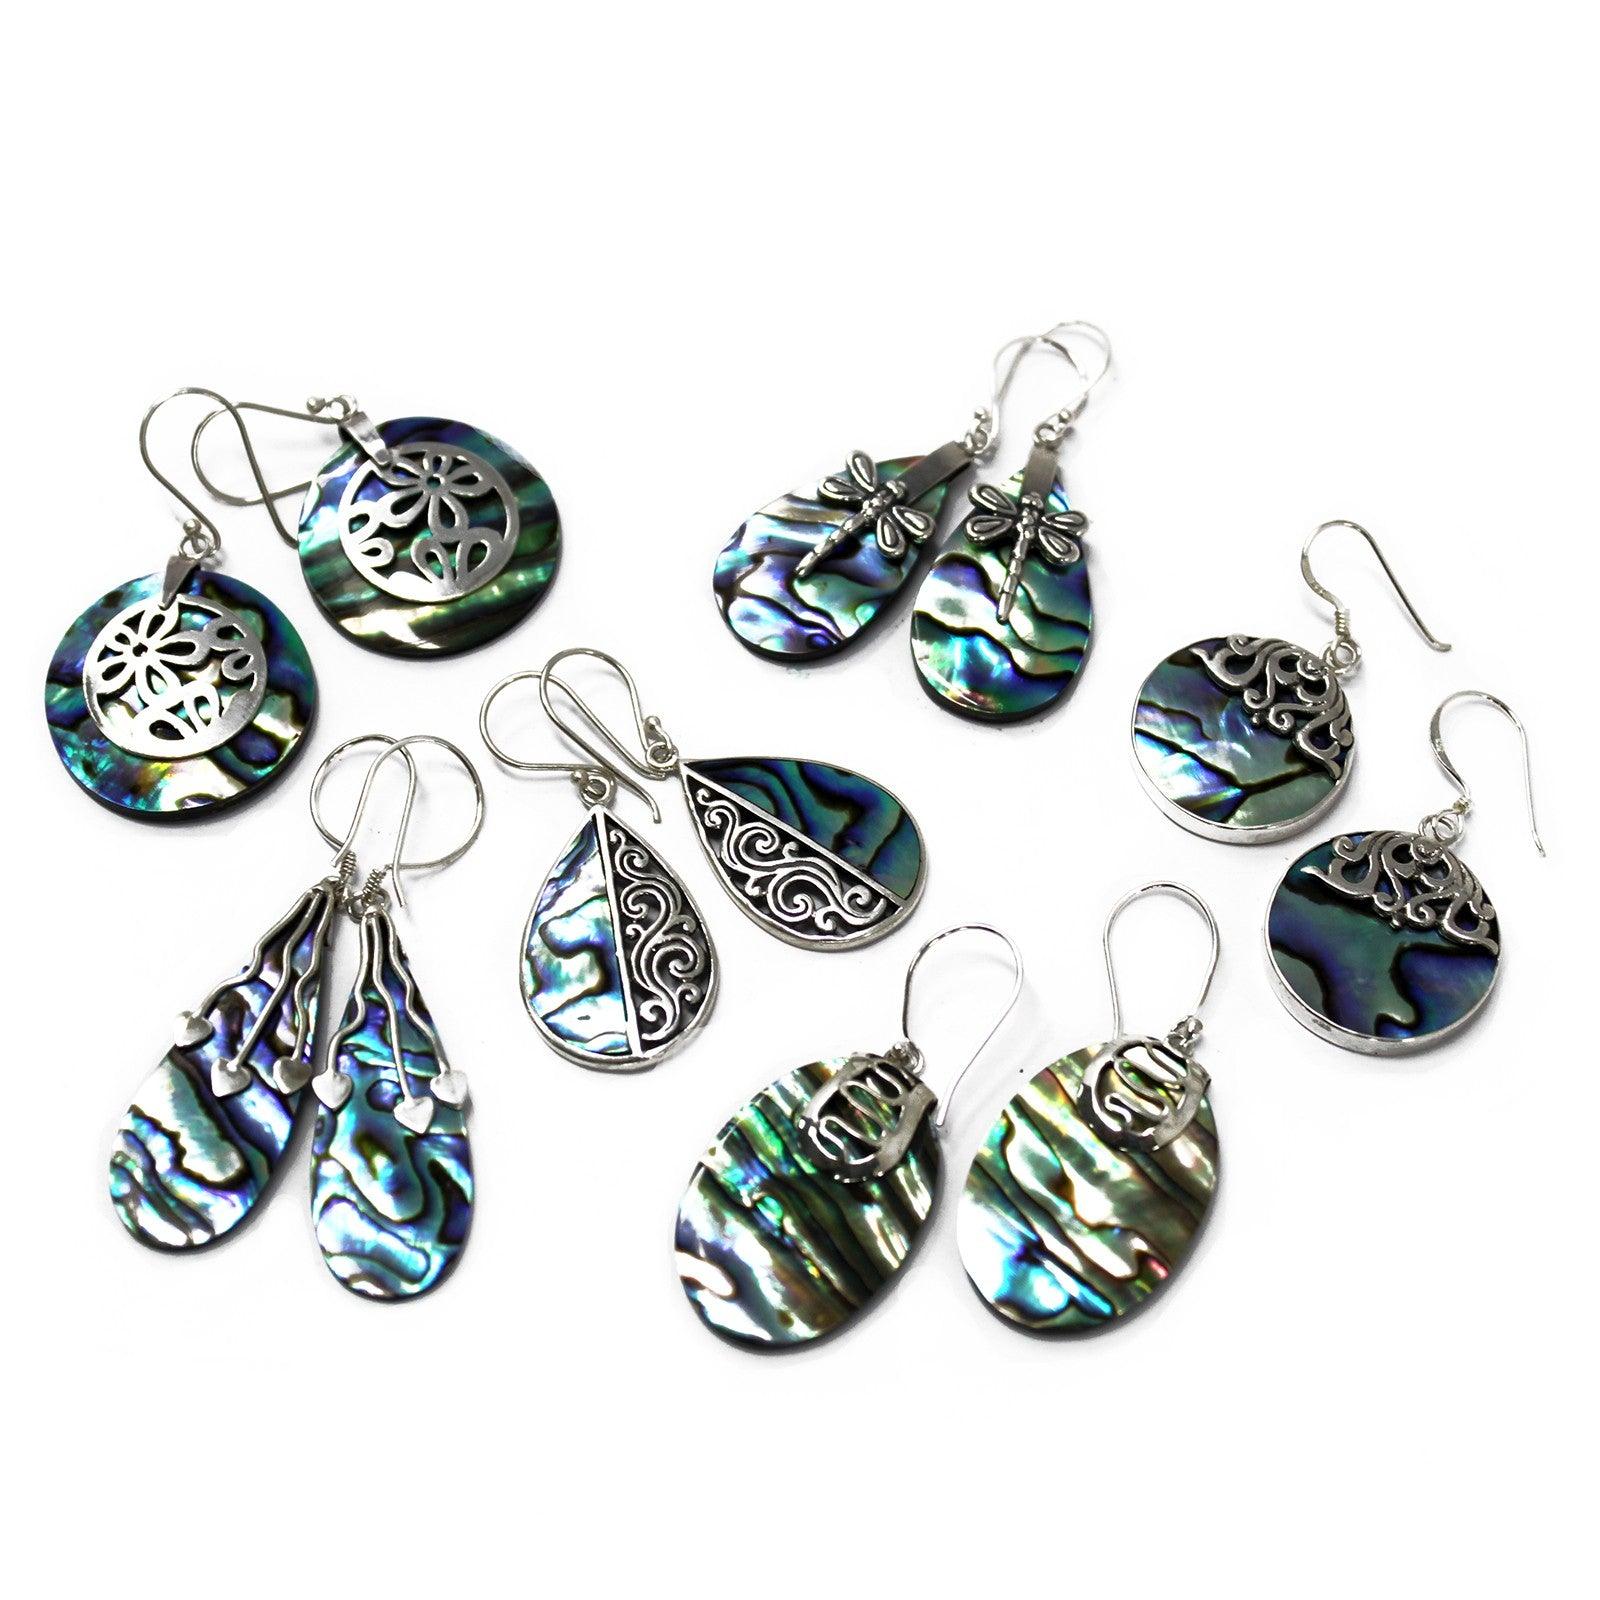 Shell & Silver Earrings - Three Hearts - Abalone - DuvetDay.co.uk